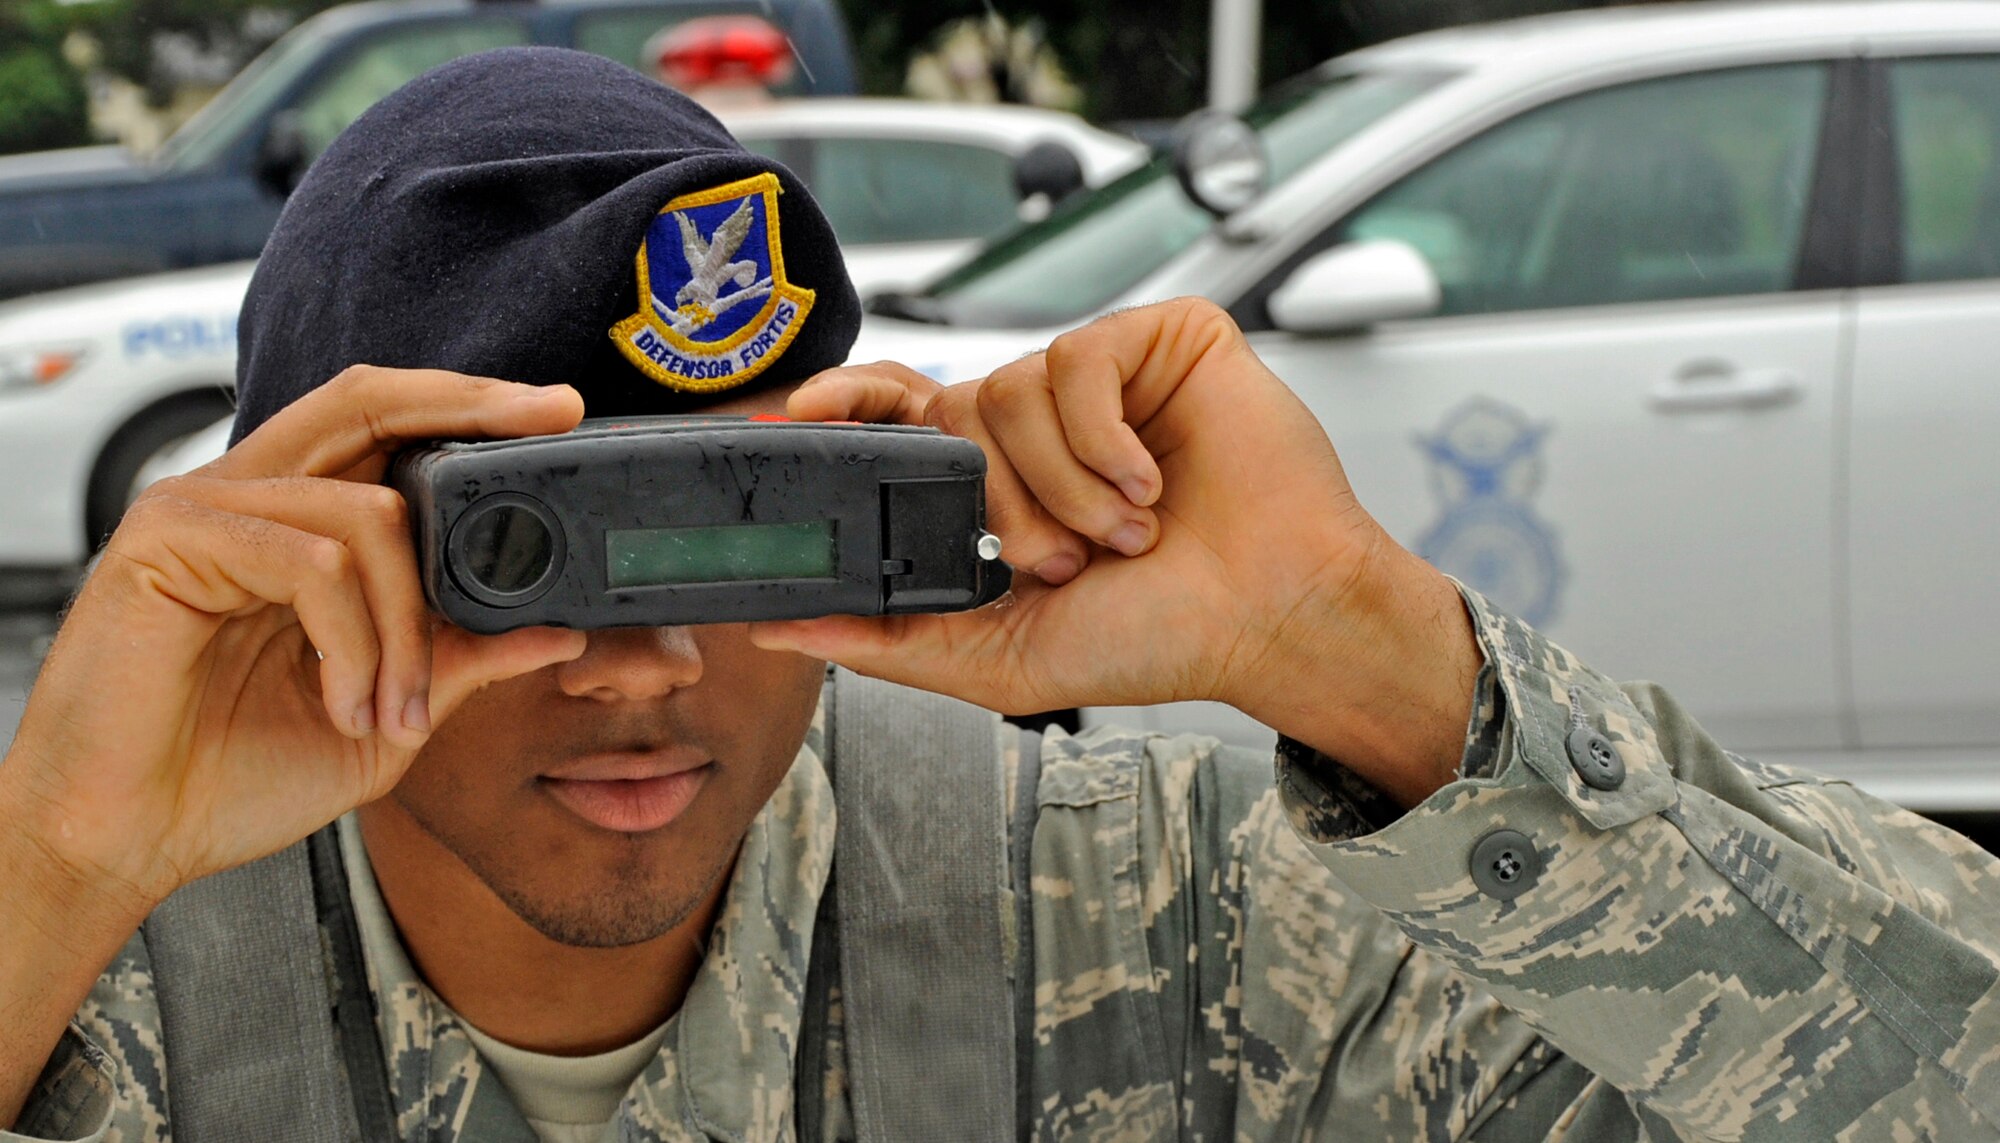 U.S. Air Force Airman 1st Class Adrian Isom, 35th Security Forces Squadron basic force protection, simulates using a Lidar to measure how fast cars are going at Misawa Air Base, Japan, July 11, 2013. If caught speeding the police take points from your license as a penalty. 33 kilometers per hour -and over the speed limit you lose 6 points and get your license revoked for a year. (U.S. Air Force photo by Airman 1st Class Kenna Jackson)